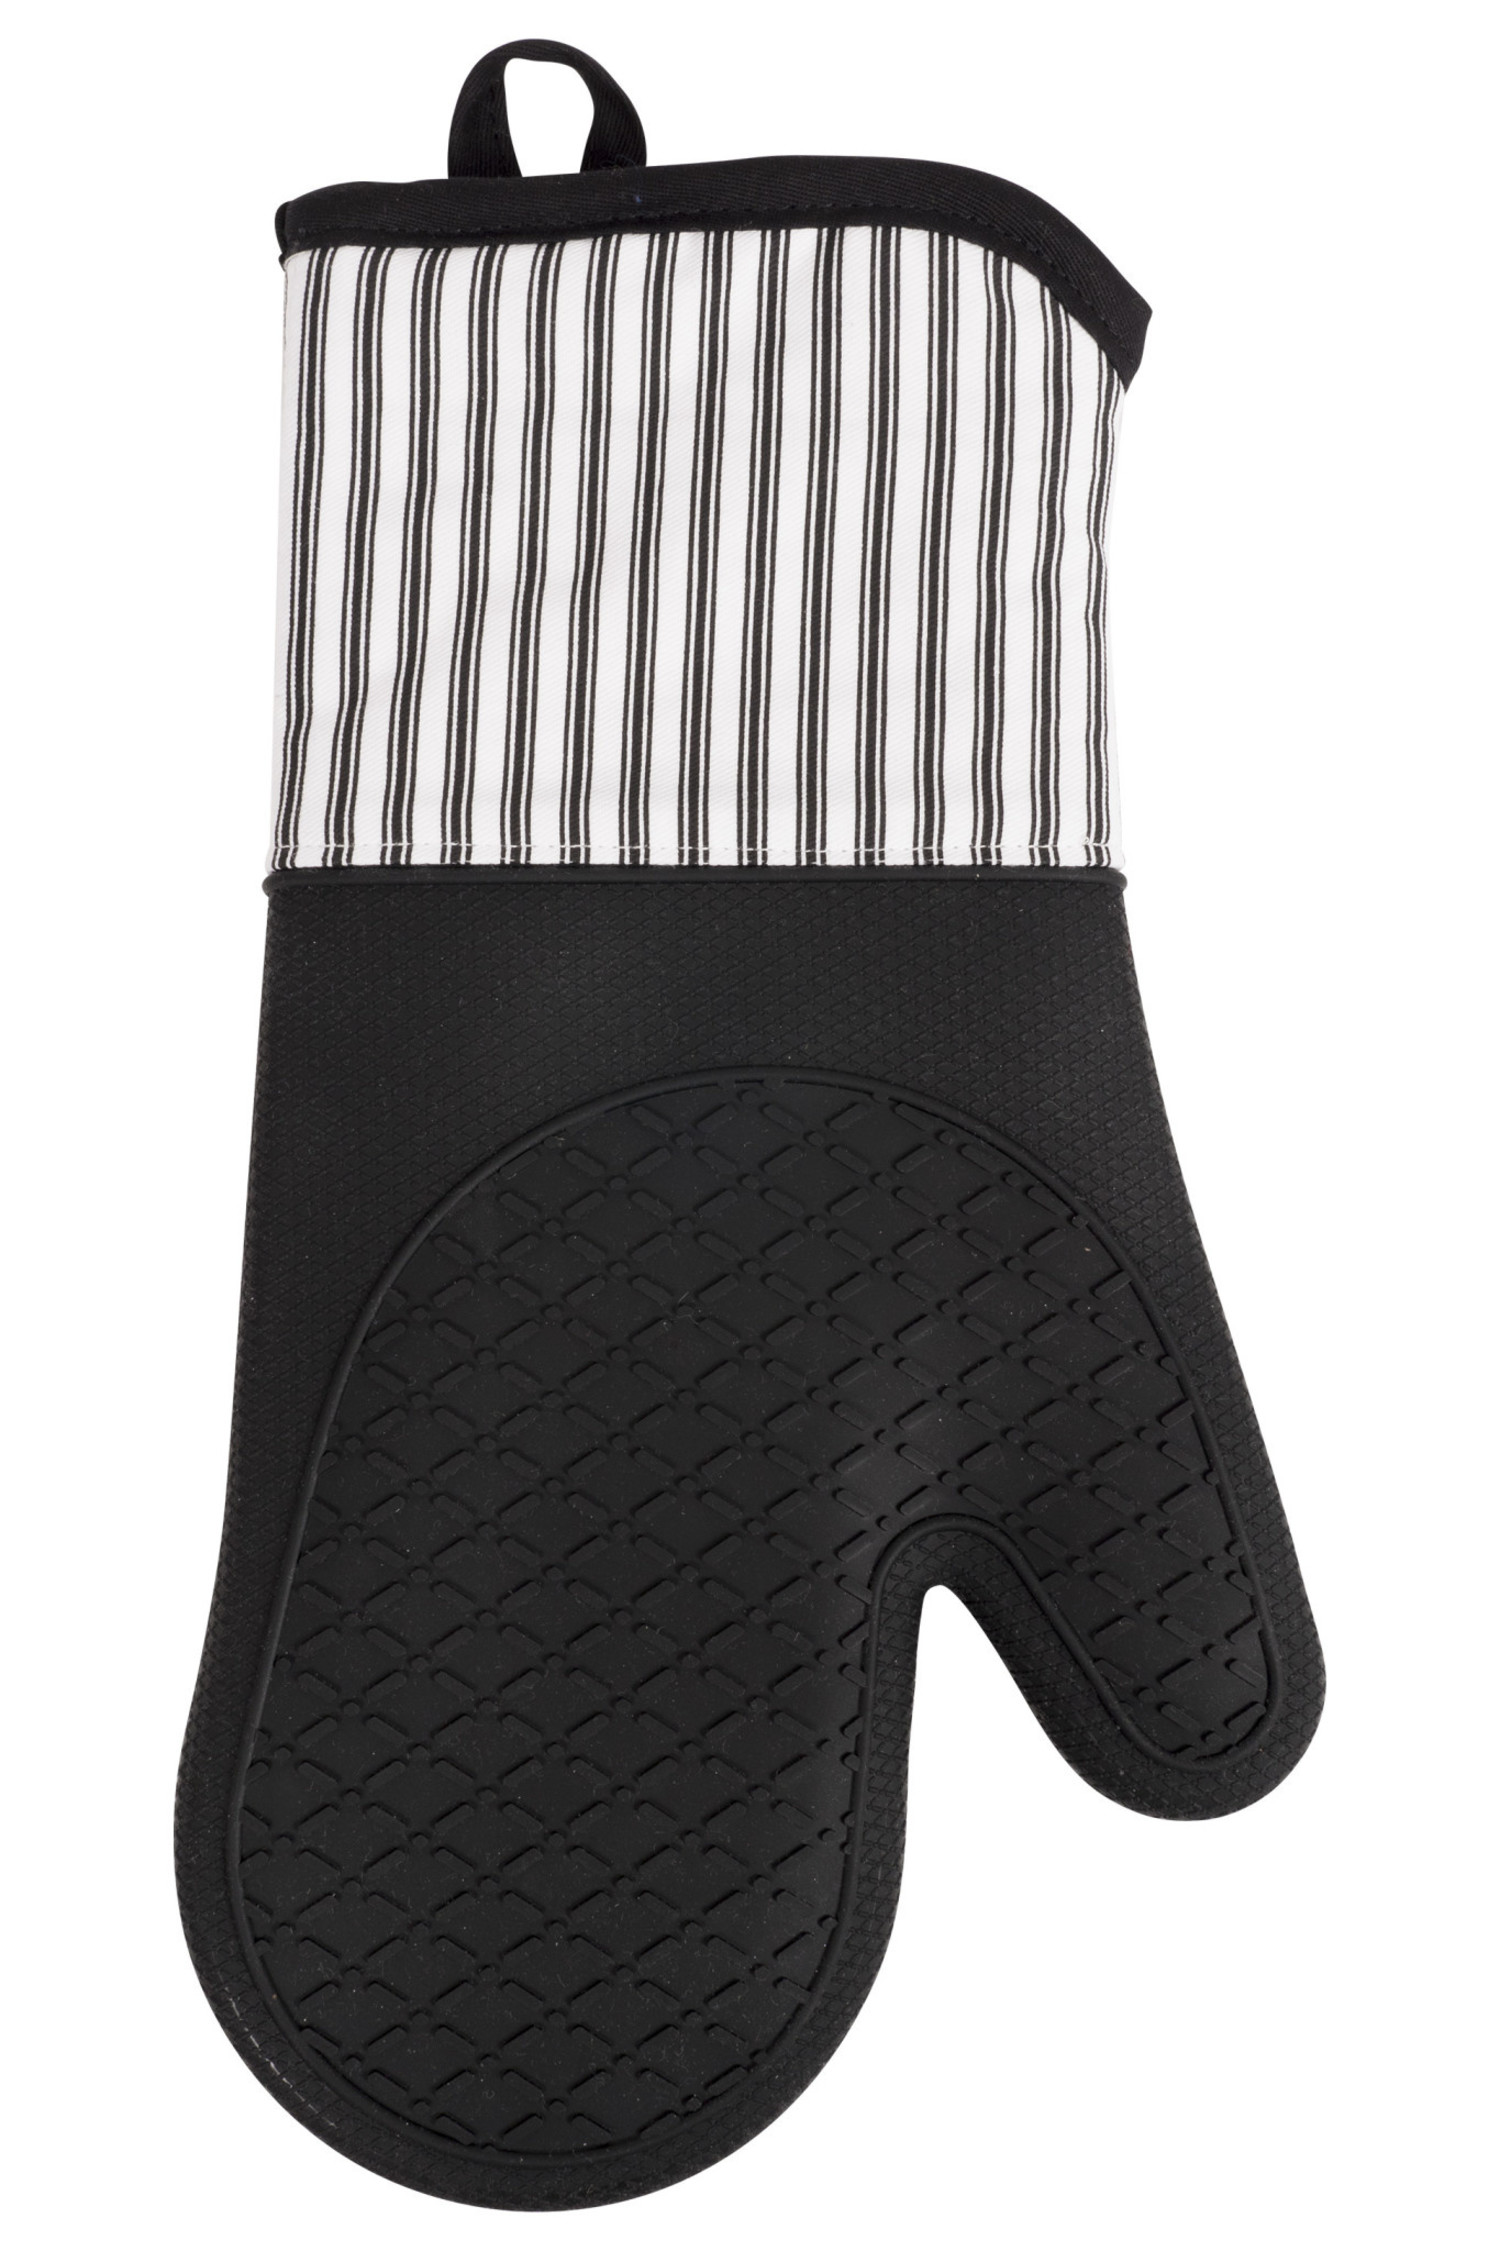 Thumb’s Up Oven Mitt, Set of 2, Charcoal with White Stripe, Set of 2